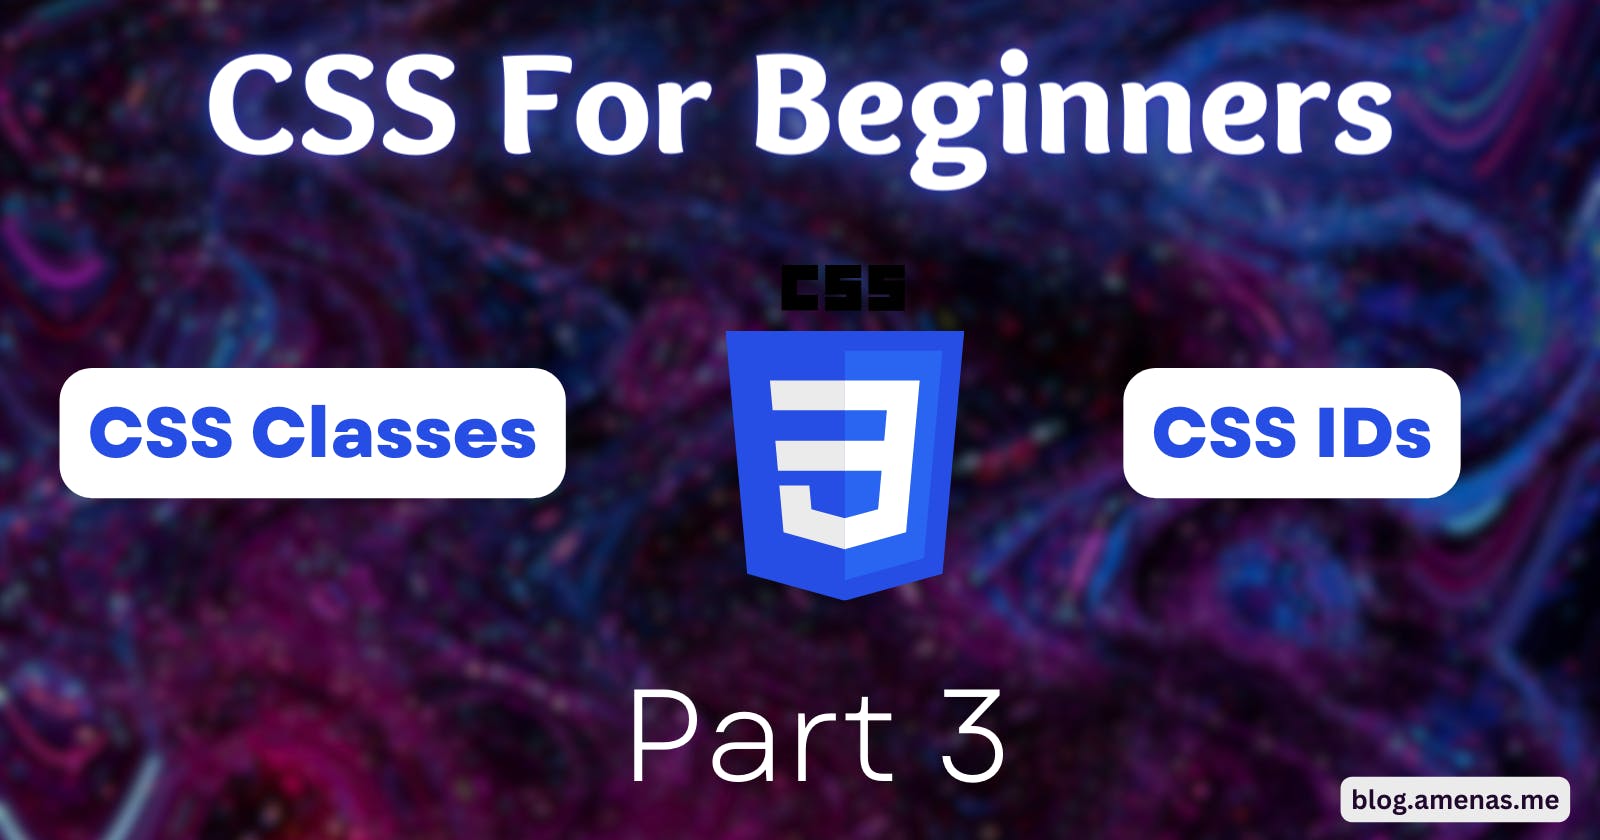 CSS for Beginners Part 3 (Learn in a Fun way! 🎈)